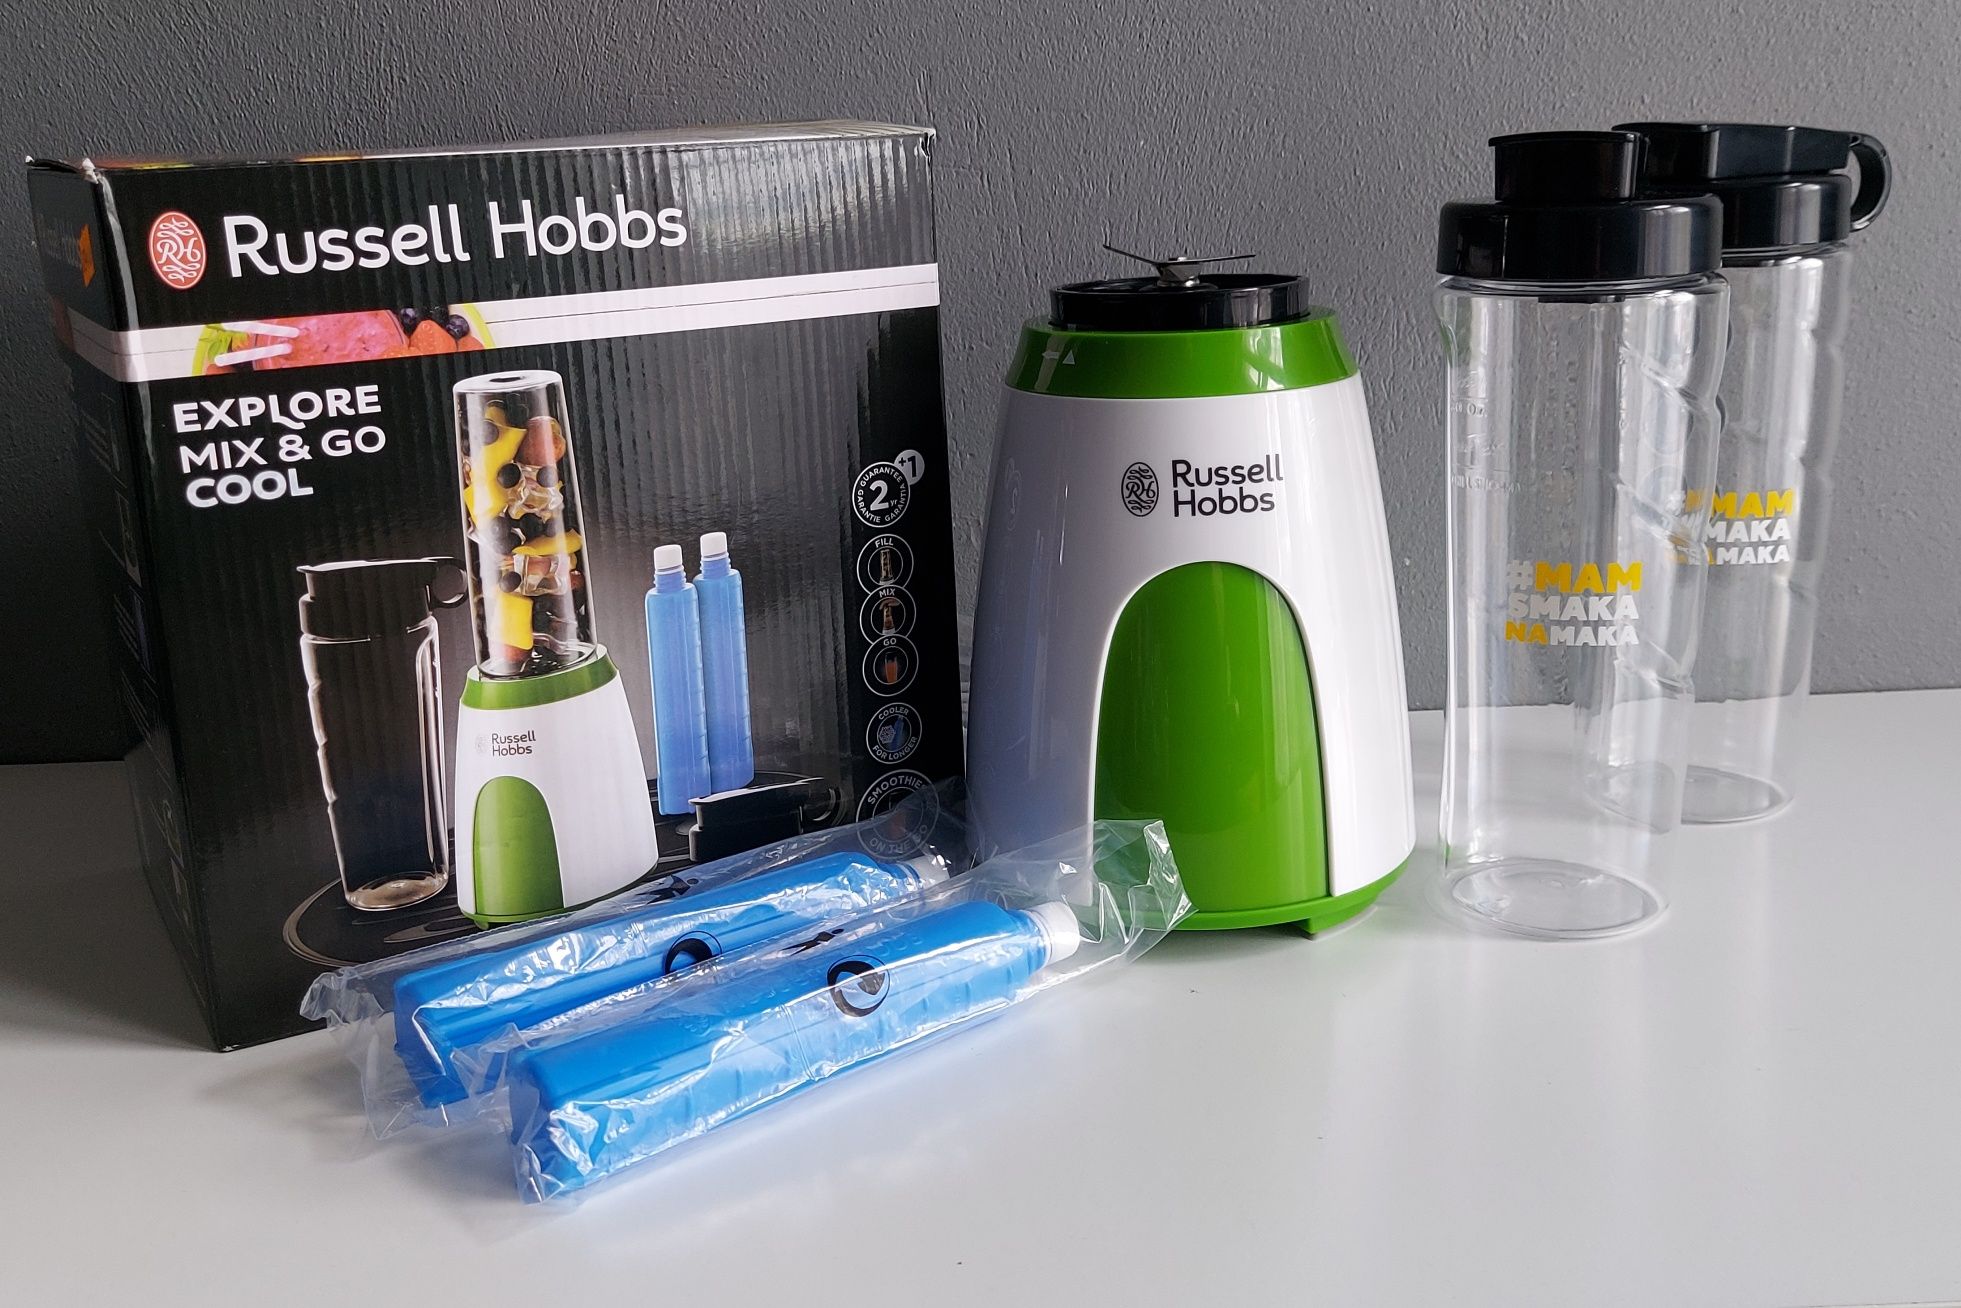 Blender ręczny RUSSELL HOBBS 300W Nowy!